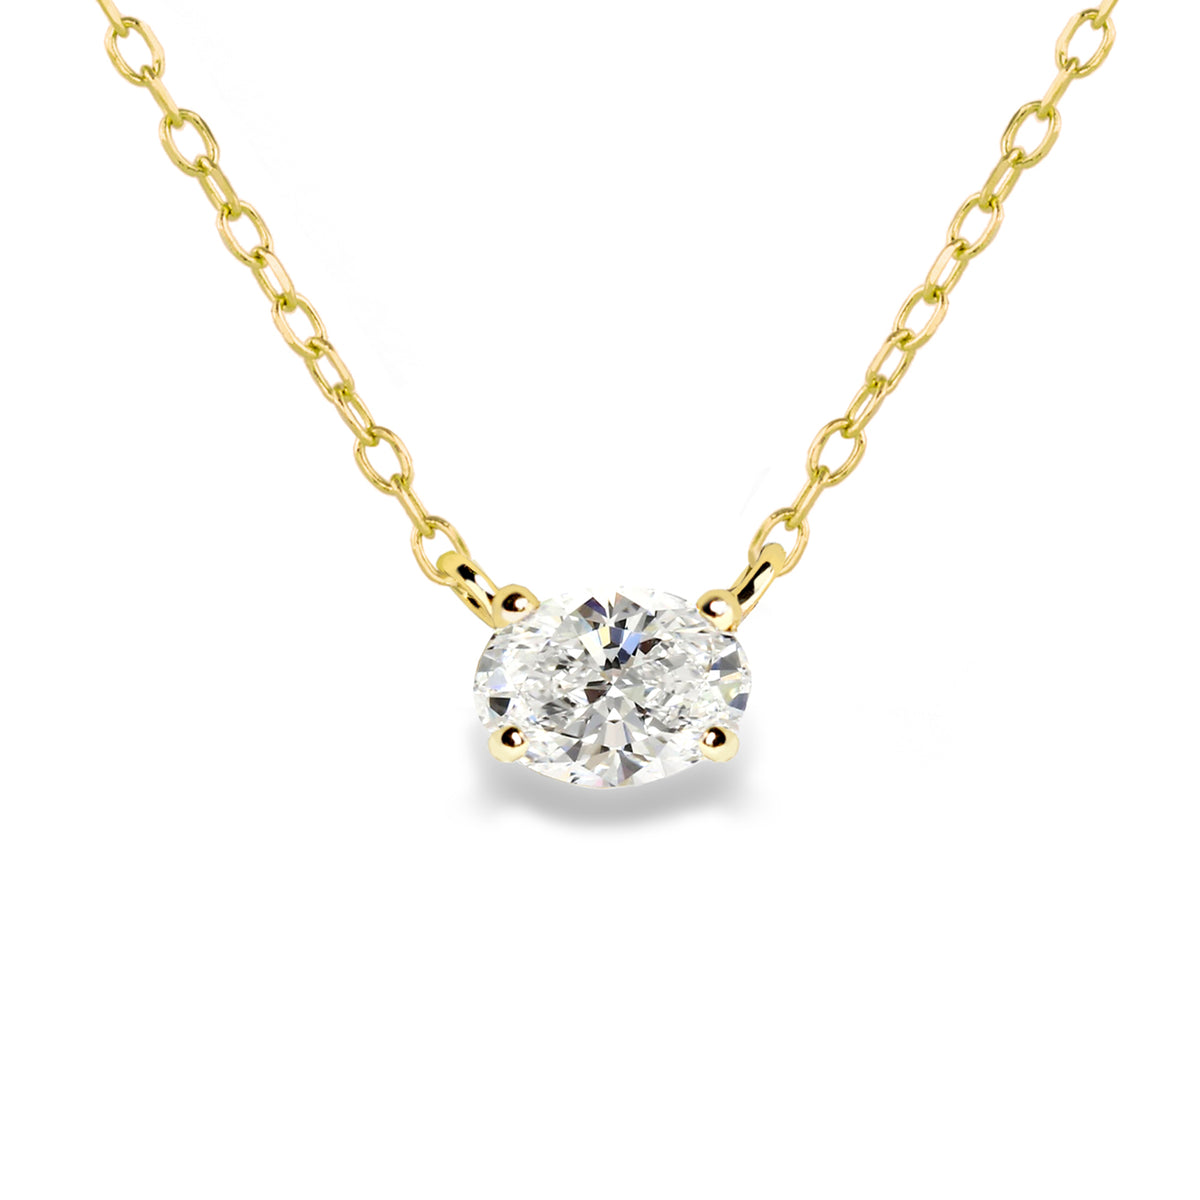 Jamie Park Oval Diamond Solitaire Necklace This Oval Diamond Solitaire Necklace features a sparkling lab diamond, set in a classic four prong design. With each diamond certified by IGI, this necklace makes for a timeless and cherished gift, perfect for any special occasion. Add a touch of elegance to any outfit with this beautiful piece. Chain length 16-18&quot;&amp;nbsp;